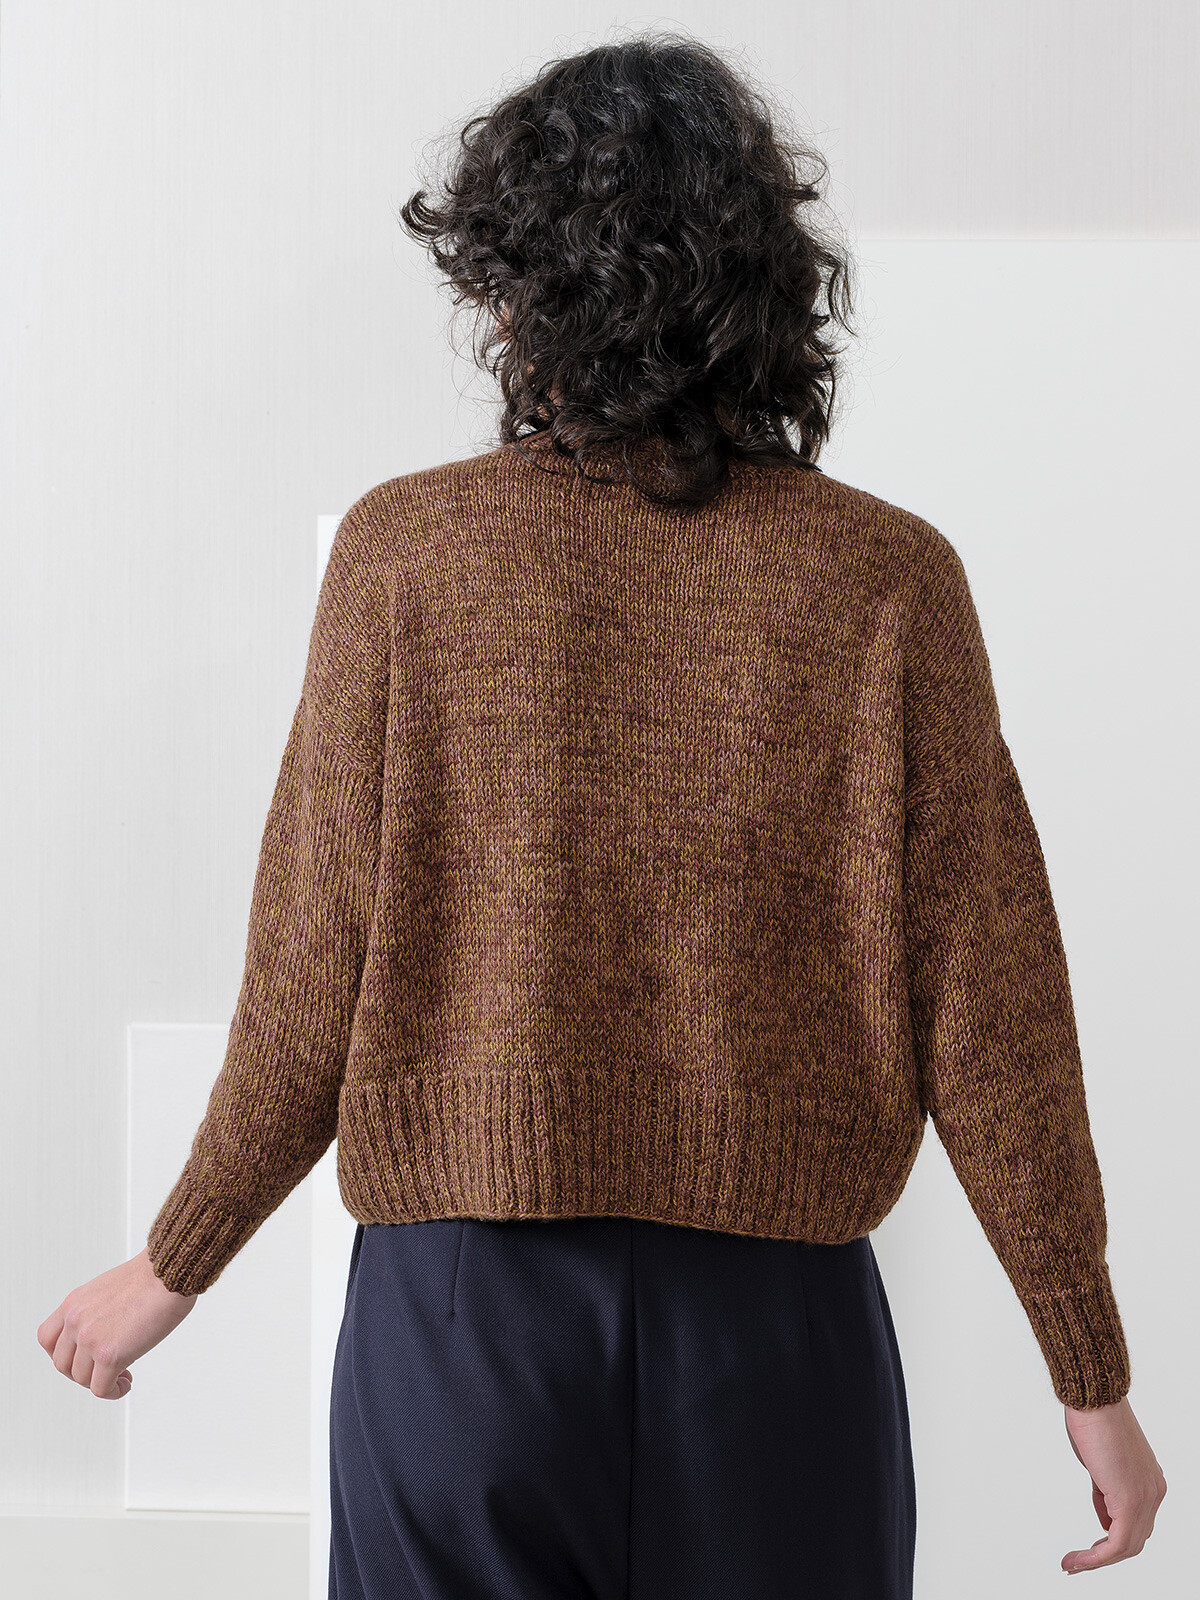 Braille sweater Image